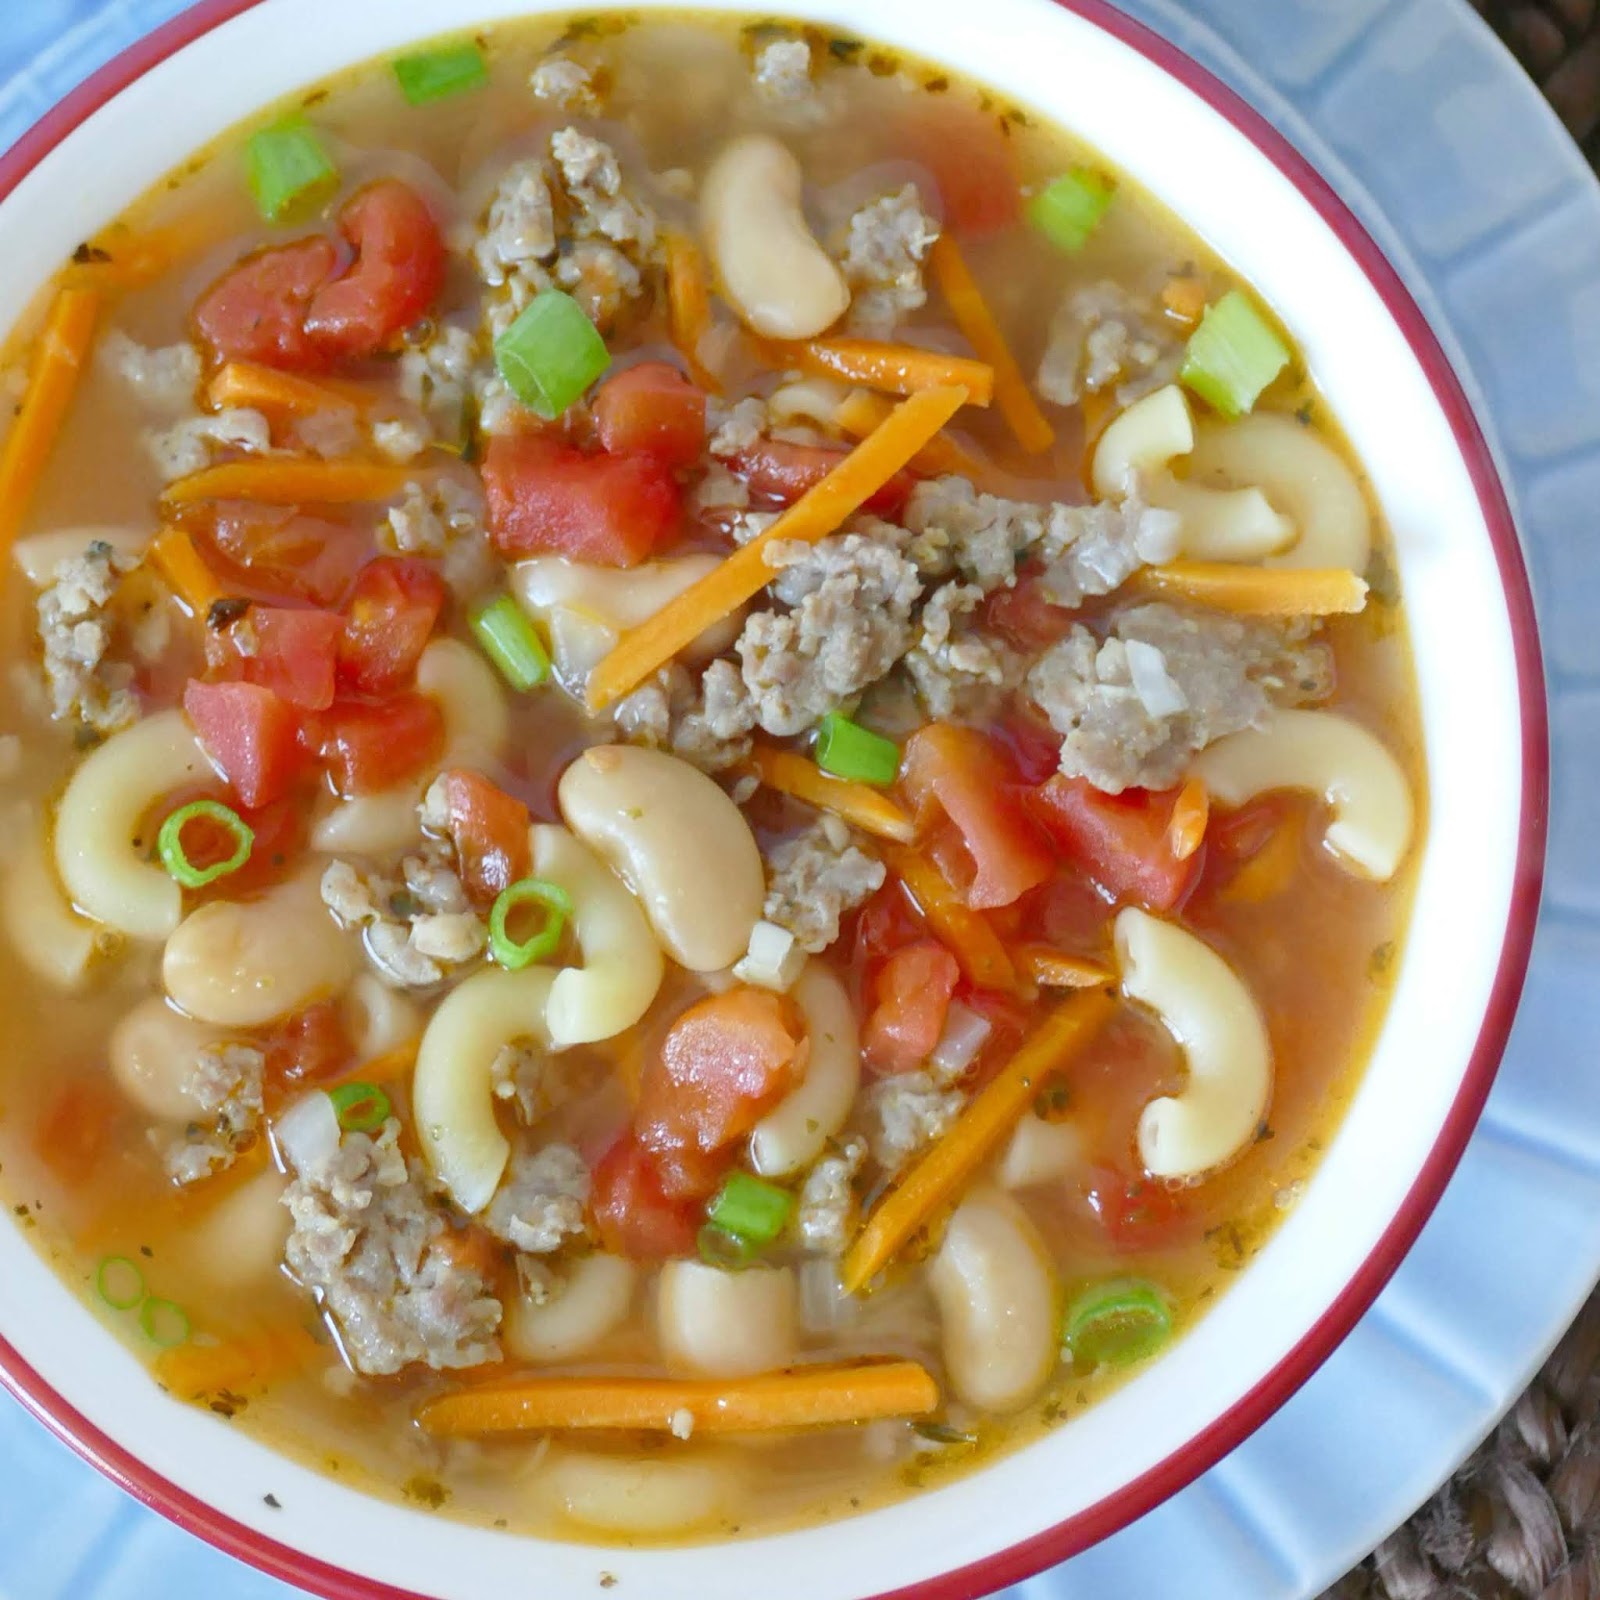 This hearty and delicious soup is budget friendly, freezer friendly and a crowd pleaser! Combine macaroni pasta, diced tomatoes, canned beans, and shredded carrots with ground pork for a great lunch or dinner!